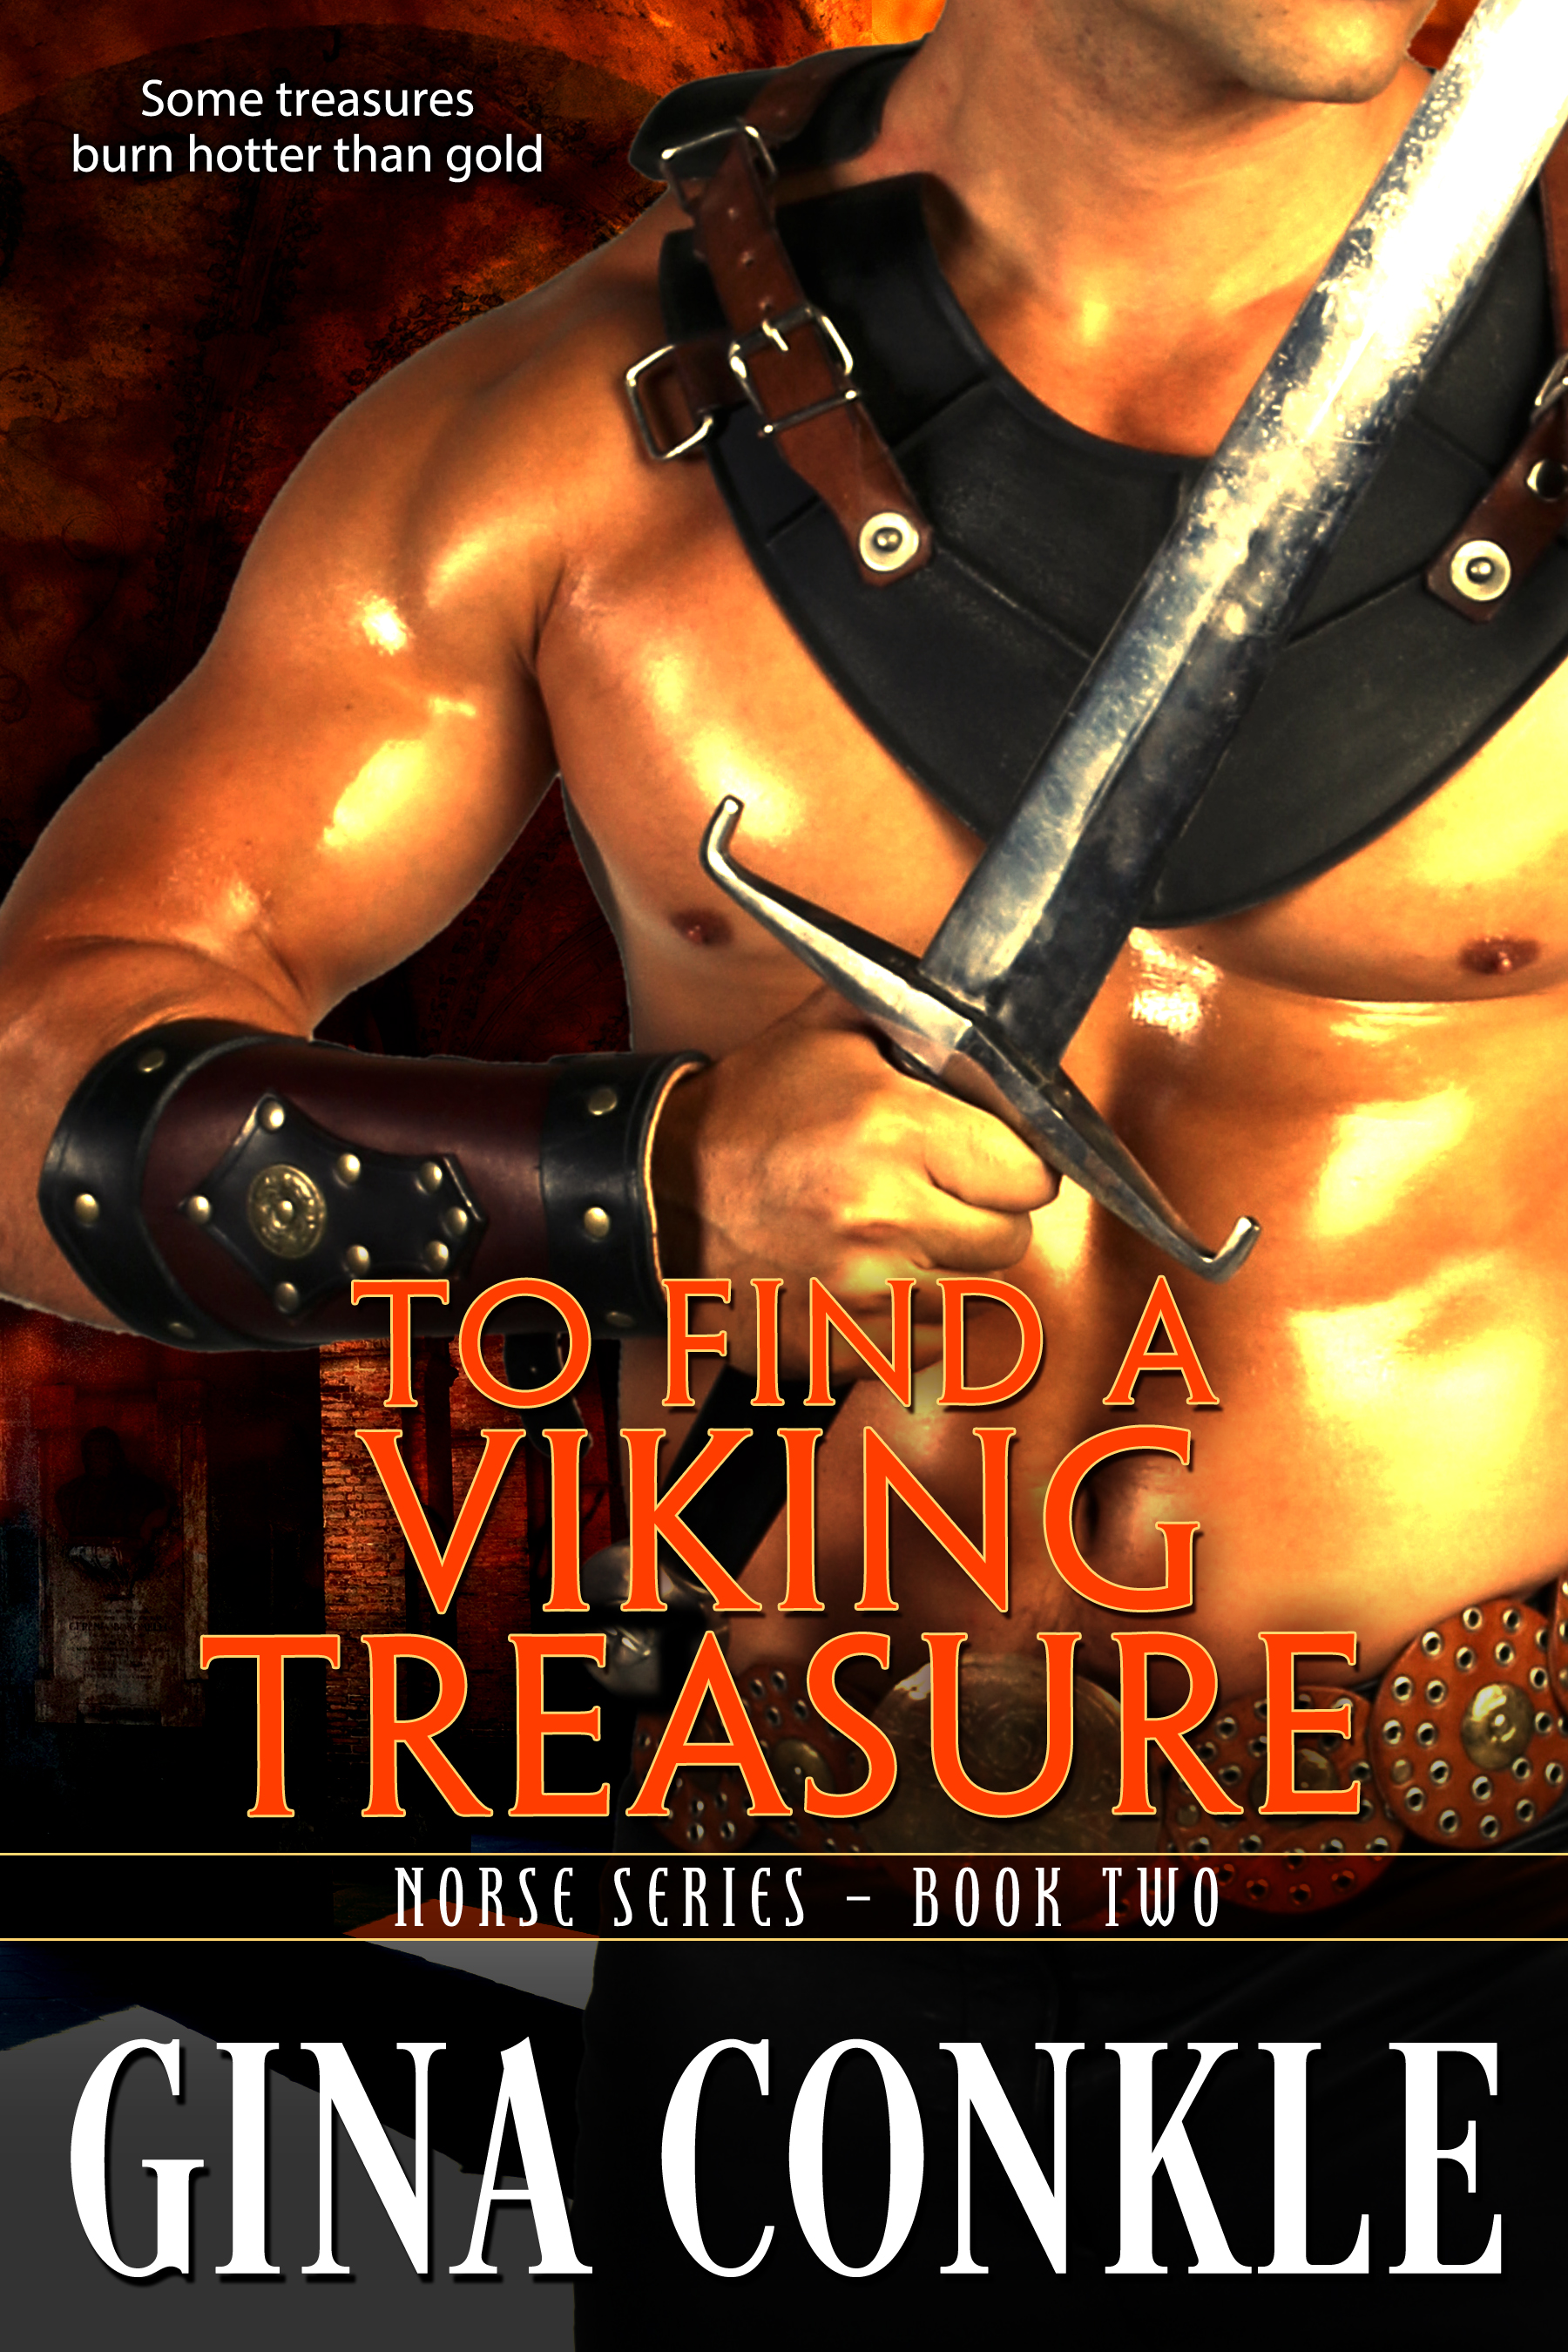 A Preview: Chapter Three of To Find a Viking Treasure